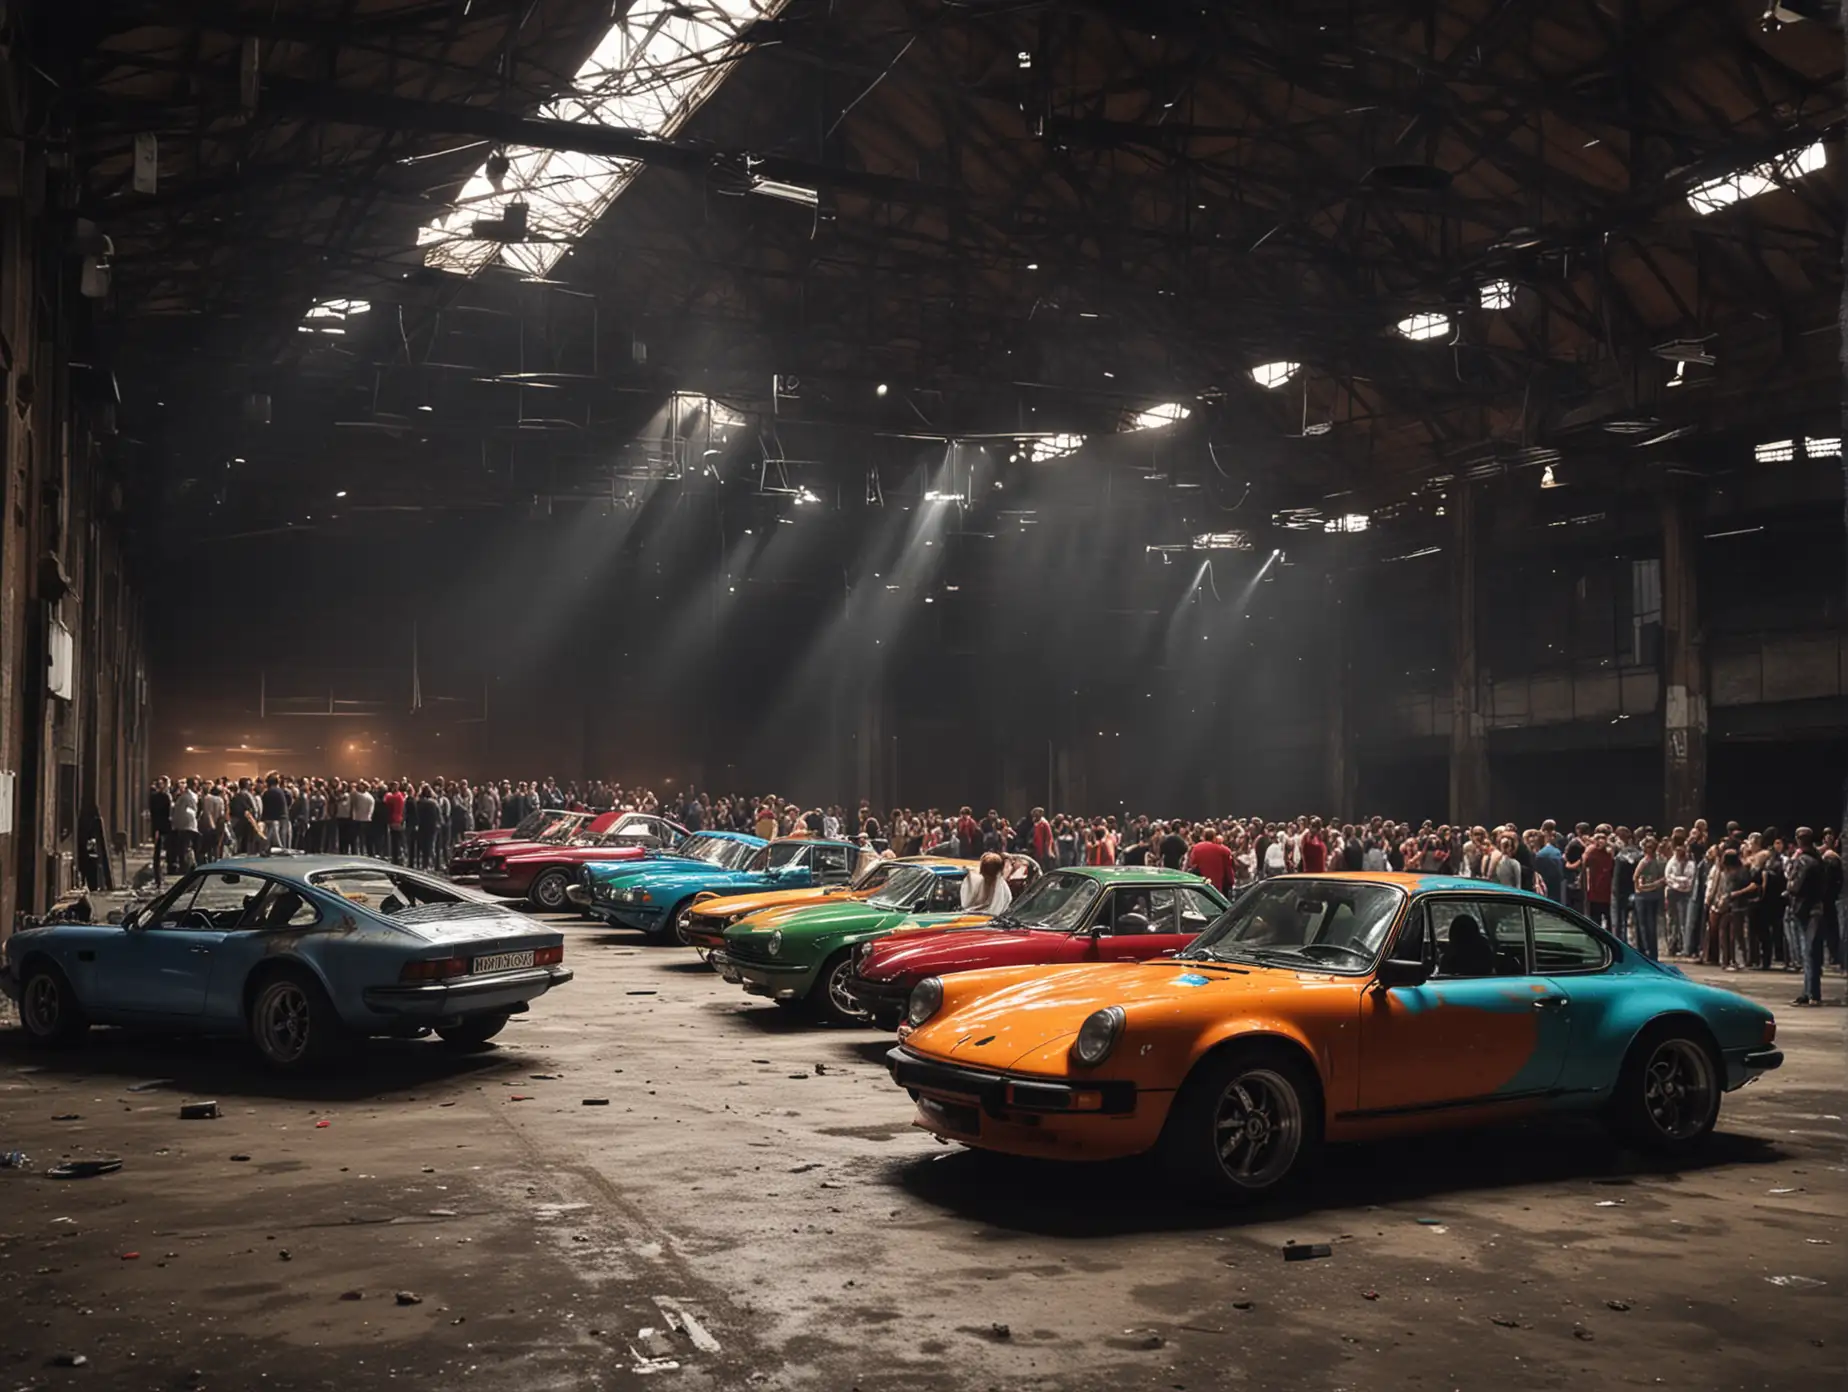 Colorful Sports Car Party in Abandoned Factory Hall with Dancing People